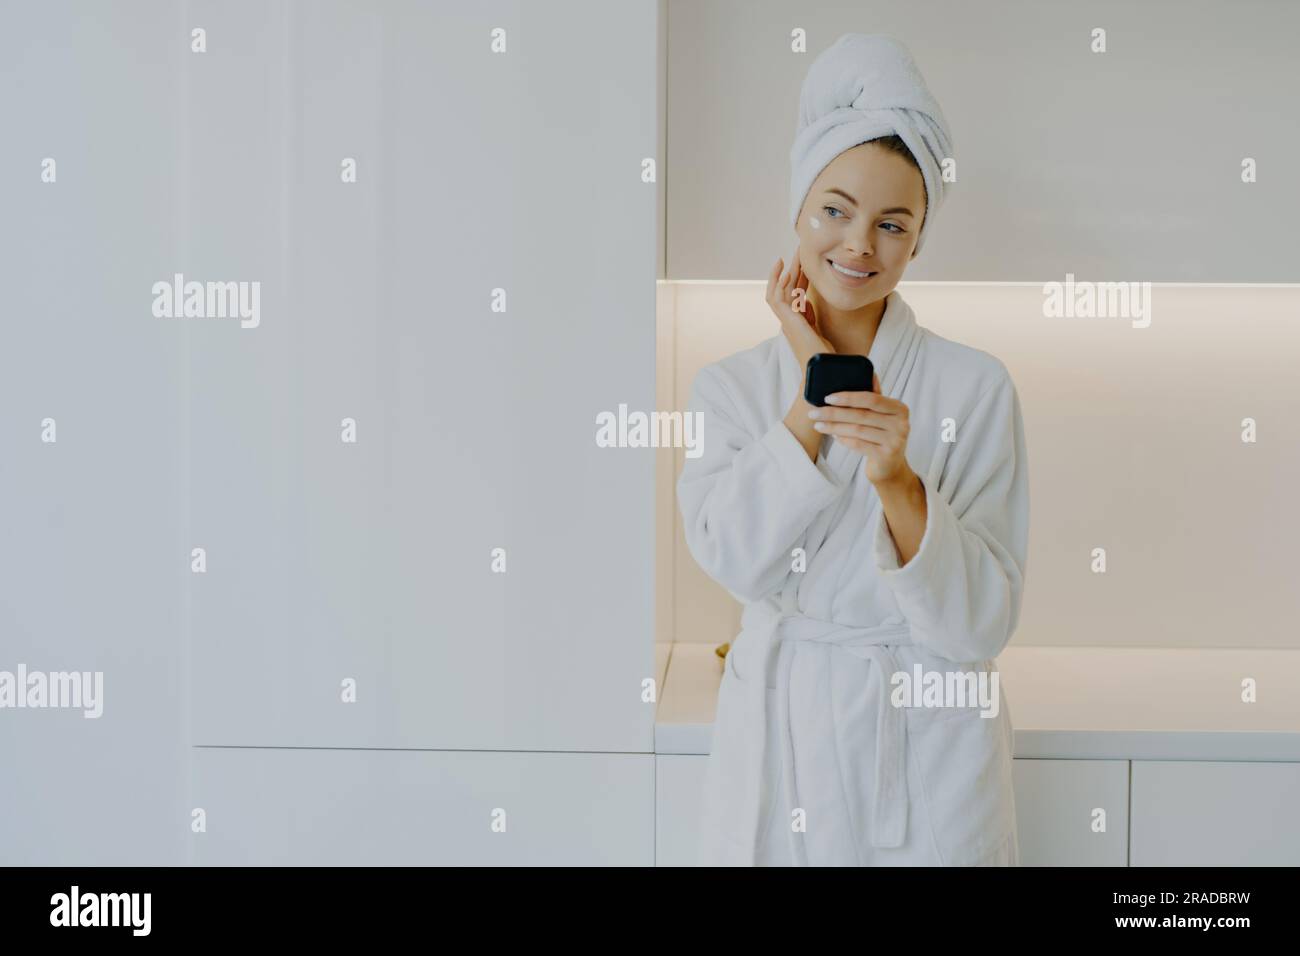 Stunning woman cares for complexion, applies cream, smiles gently, poses thoughtfully in white robe at home. Stock Photo